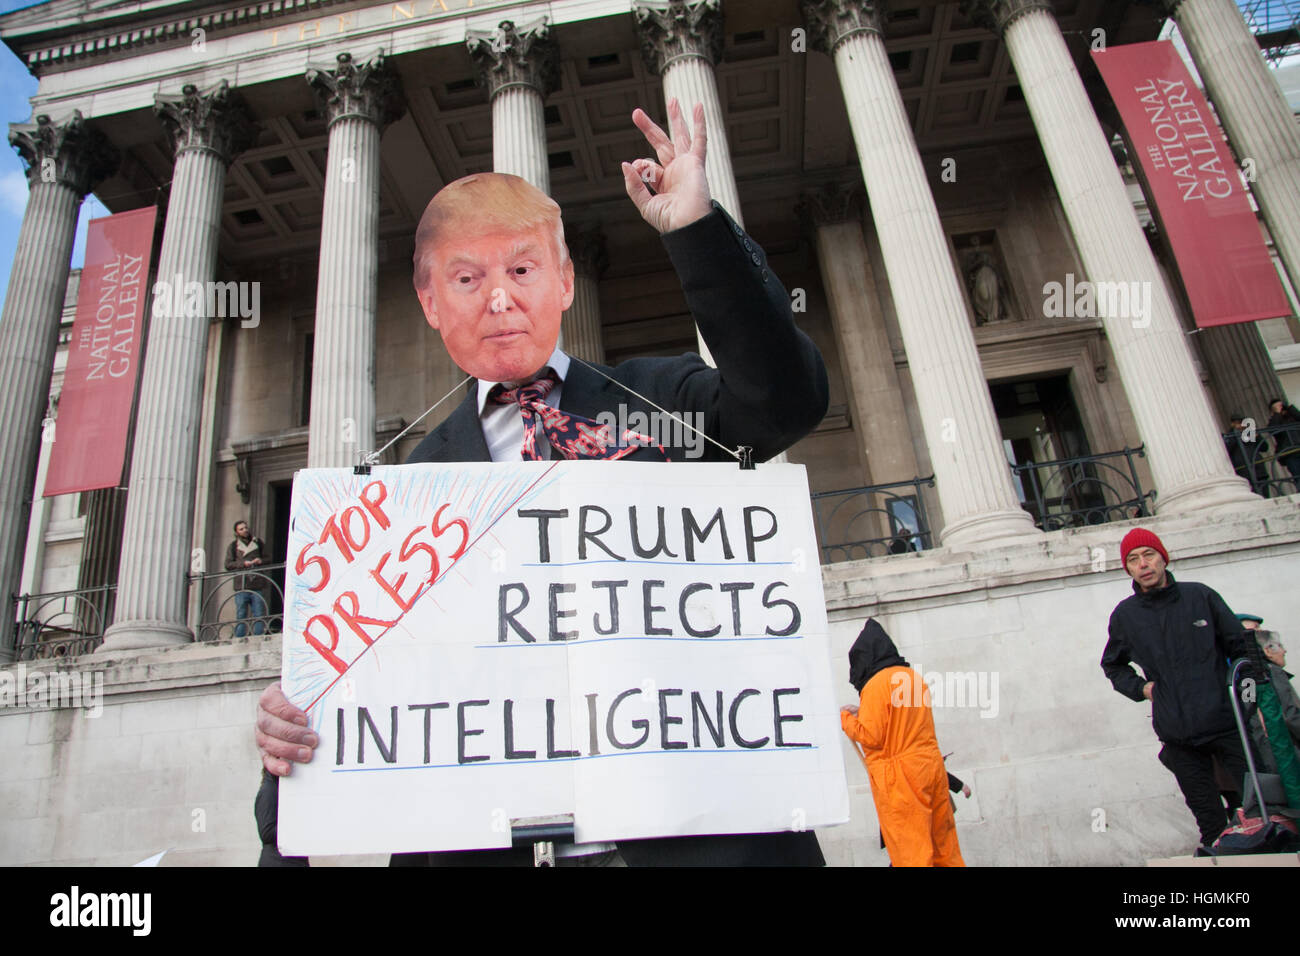 London UK. 11th January 2017. A protester wearing a Donald Trump mask protests against the US military camp in Guantanamo which turns 15 since it was opened in 11 January 2002 Credit: amer ghazzal/Alamy Live News Stock Photo